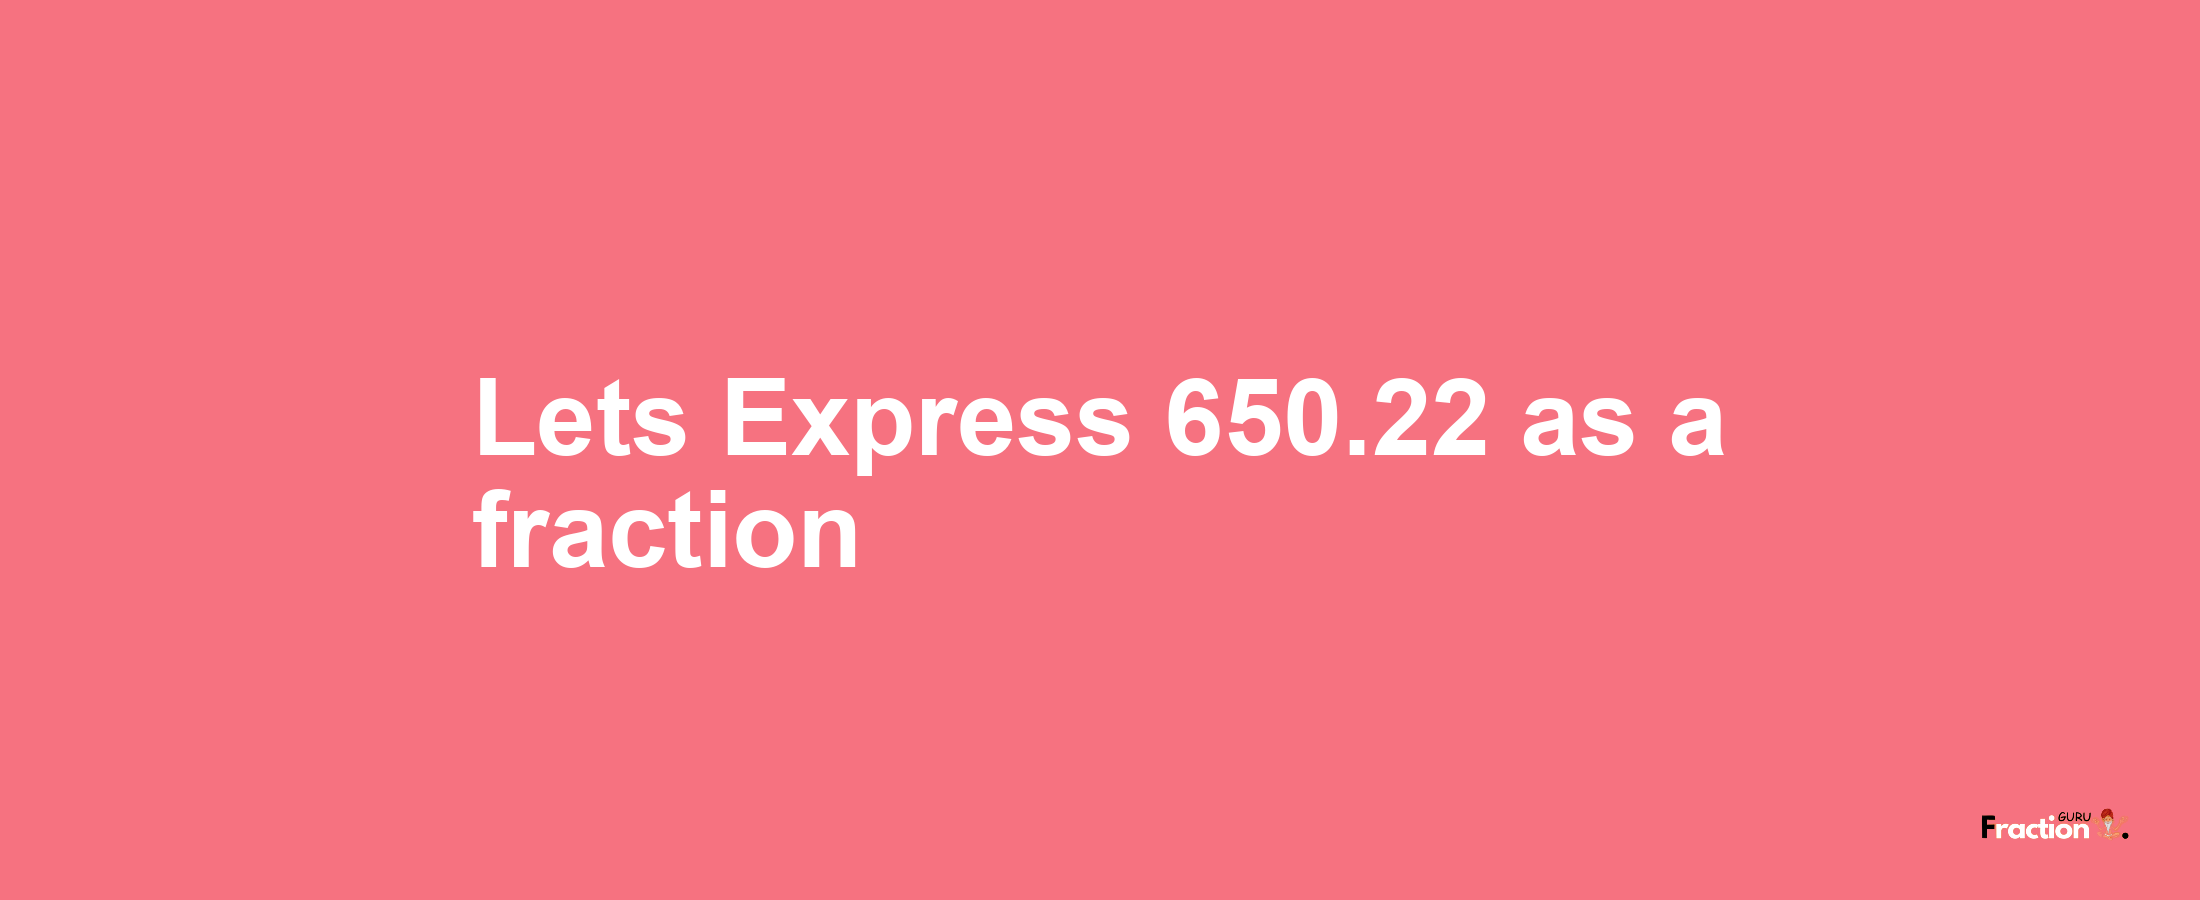 Lets Express 650.22 as afraction